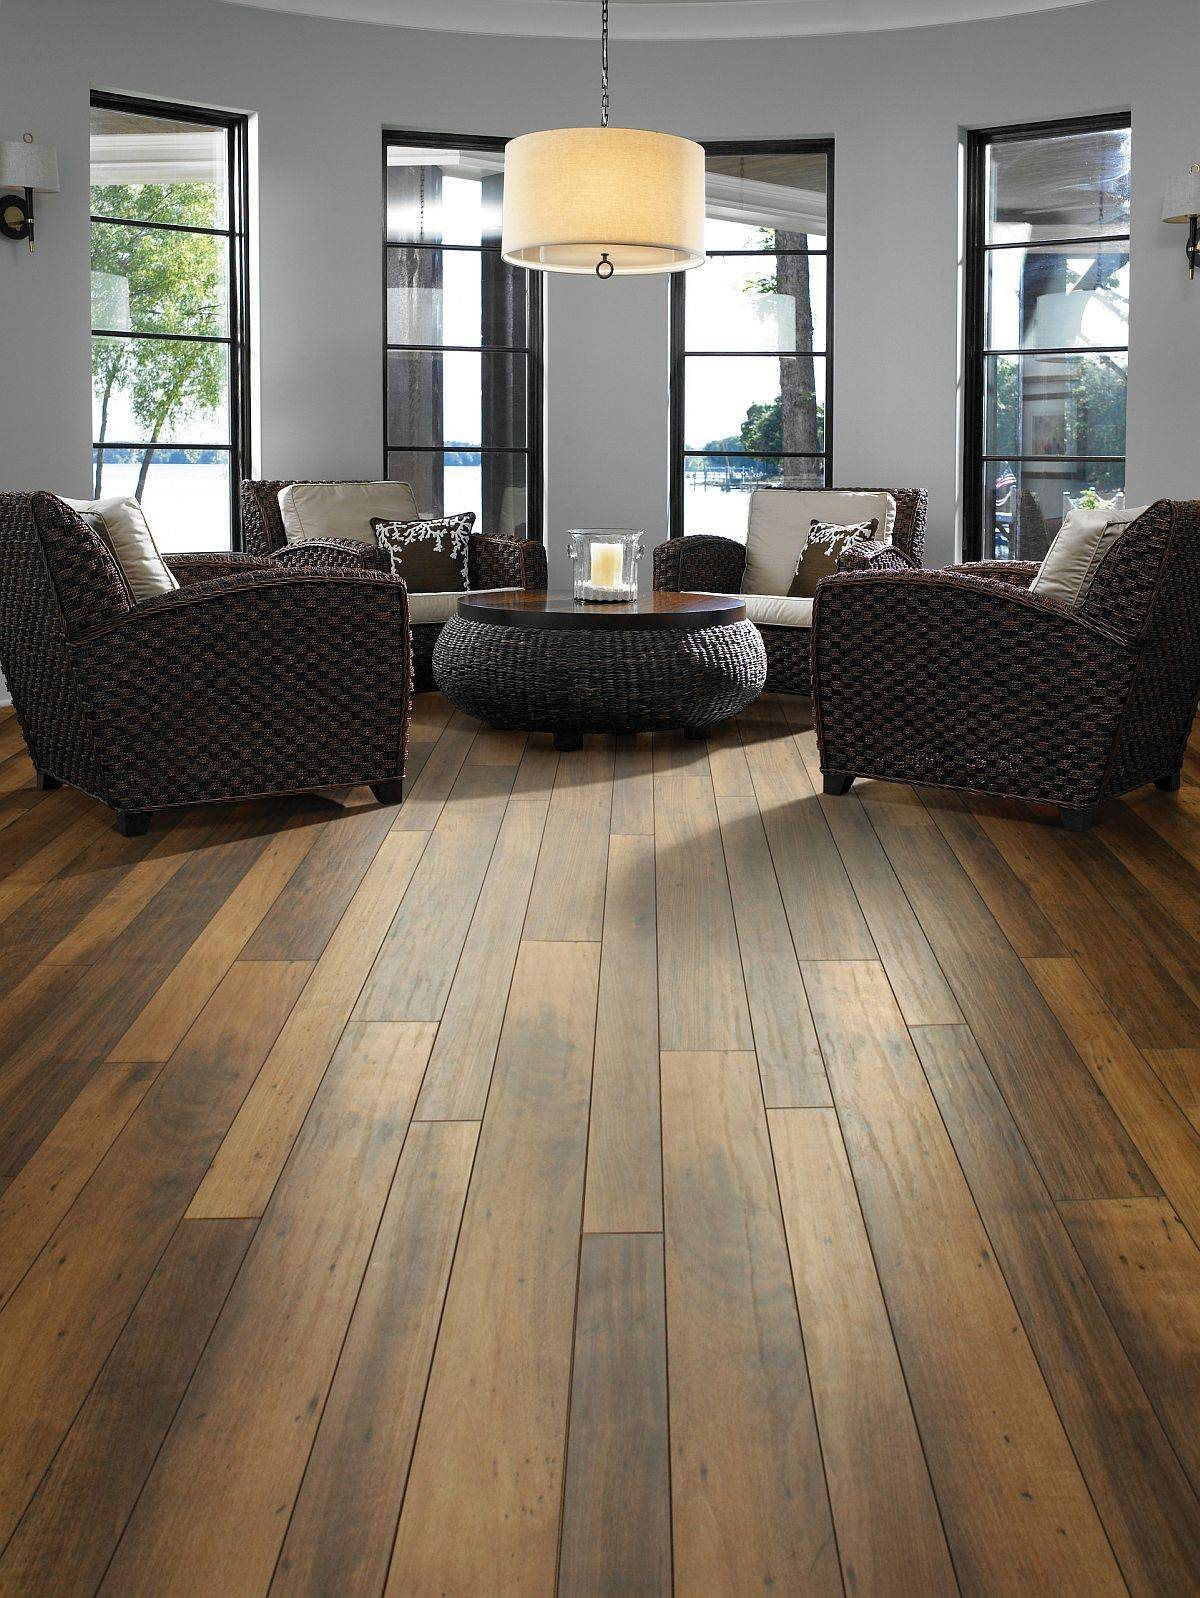 open-plan-living-space-of-florida-home-with-laminate-wood-flooring-11854.jpg